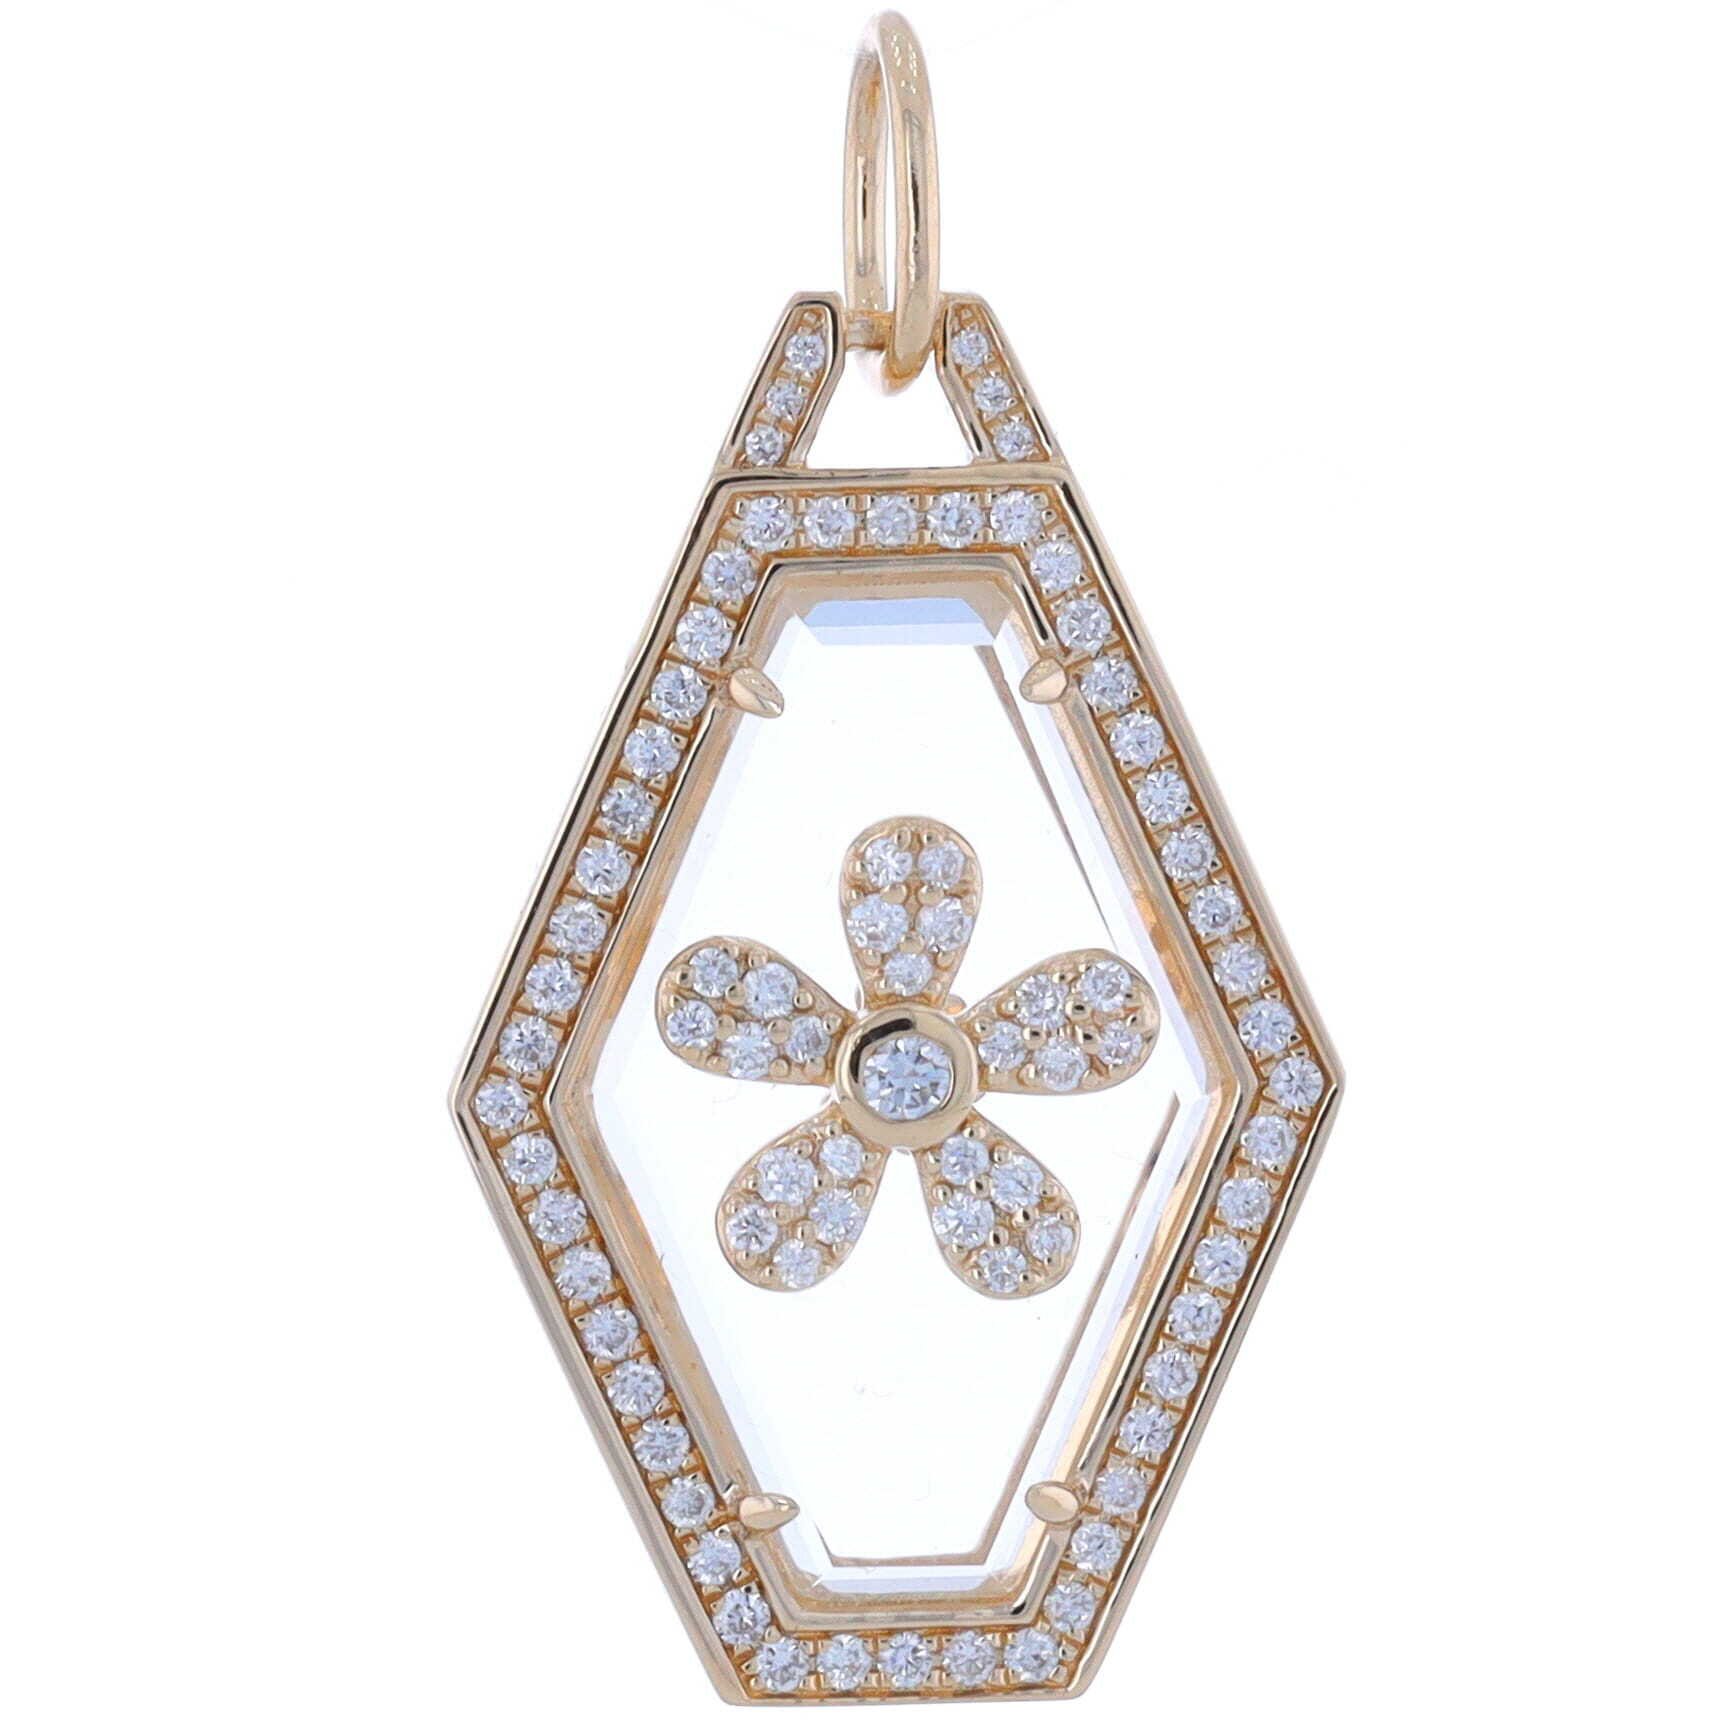 14k Yellow Gold Crystal Hexagon Pendant Charm with Pave Diamond Flower Decal